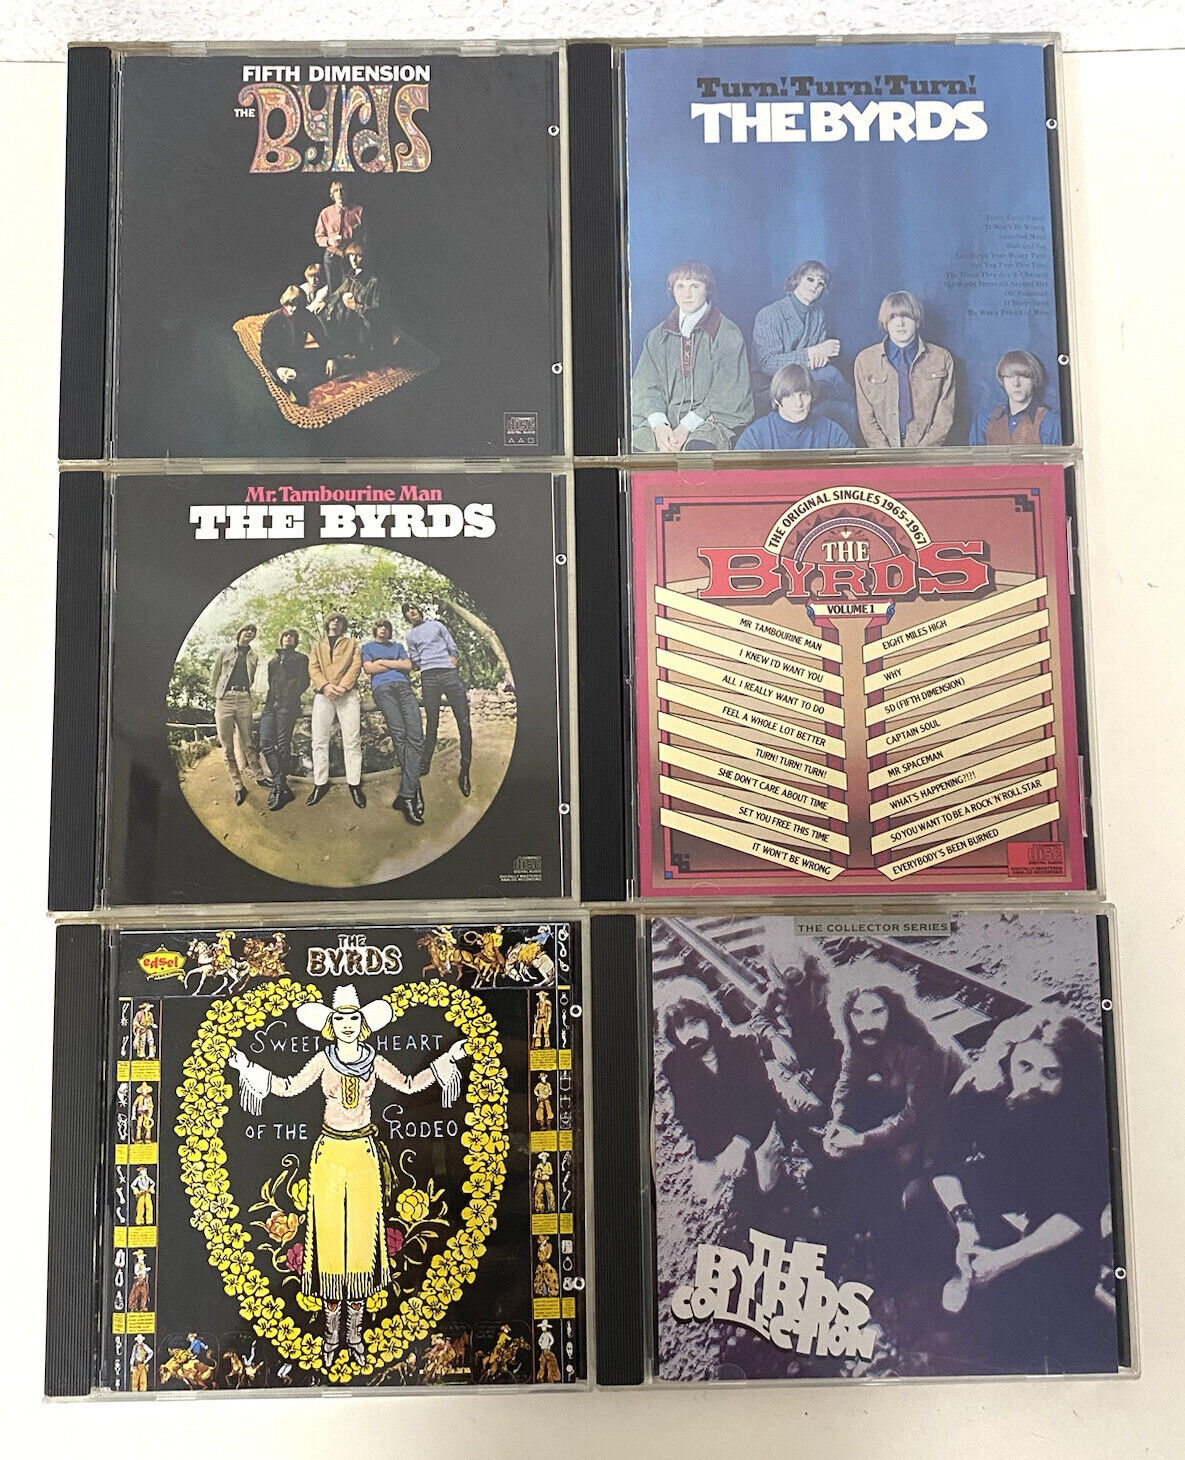 THE BYRDS 6 CD Lot Fifth Dimension, Mr Tambourine Man, Turn Turn Turn, + More